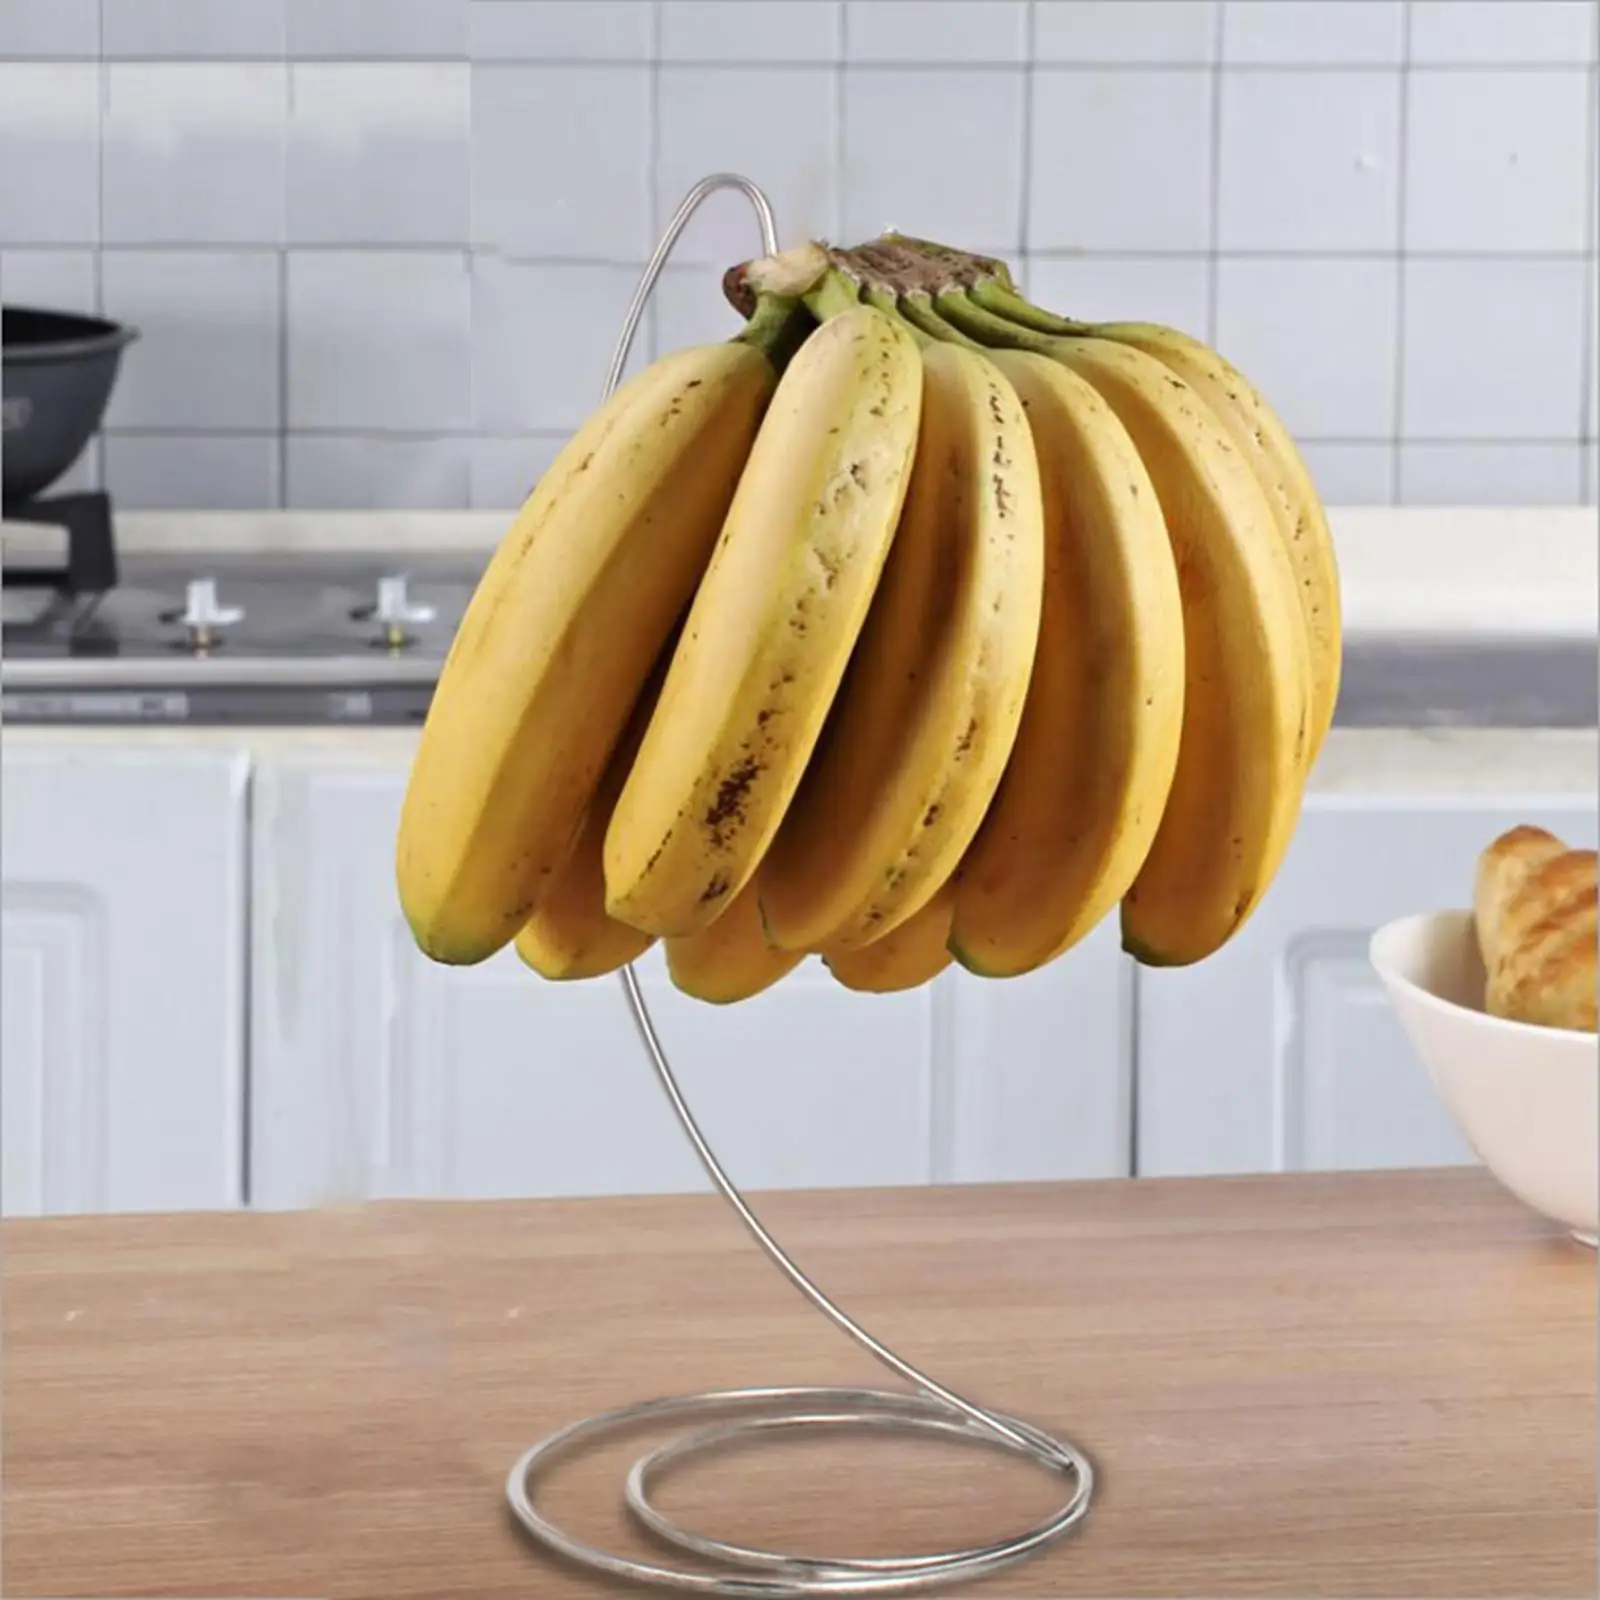 Stainless Steel Banana Tree Stand Hook Home Use Durable Accessories Draining Metal Multifunction Holder for Home Decor Kitchen